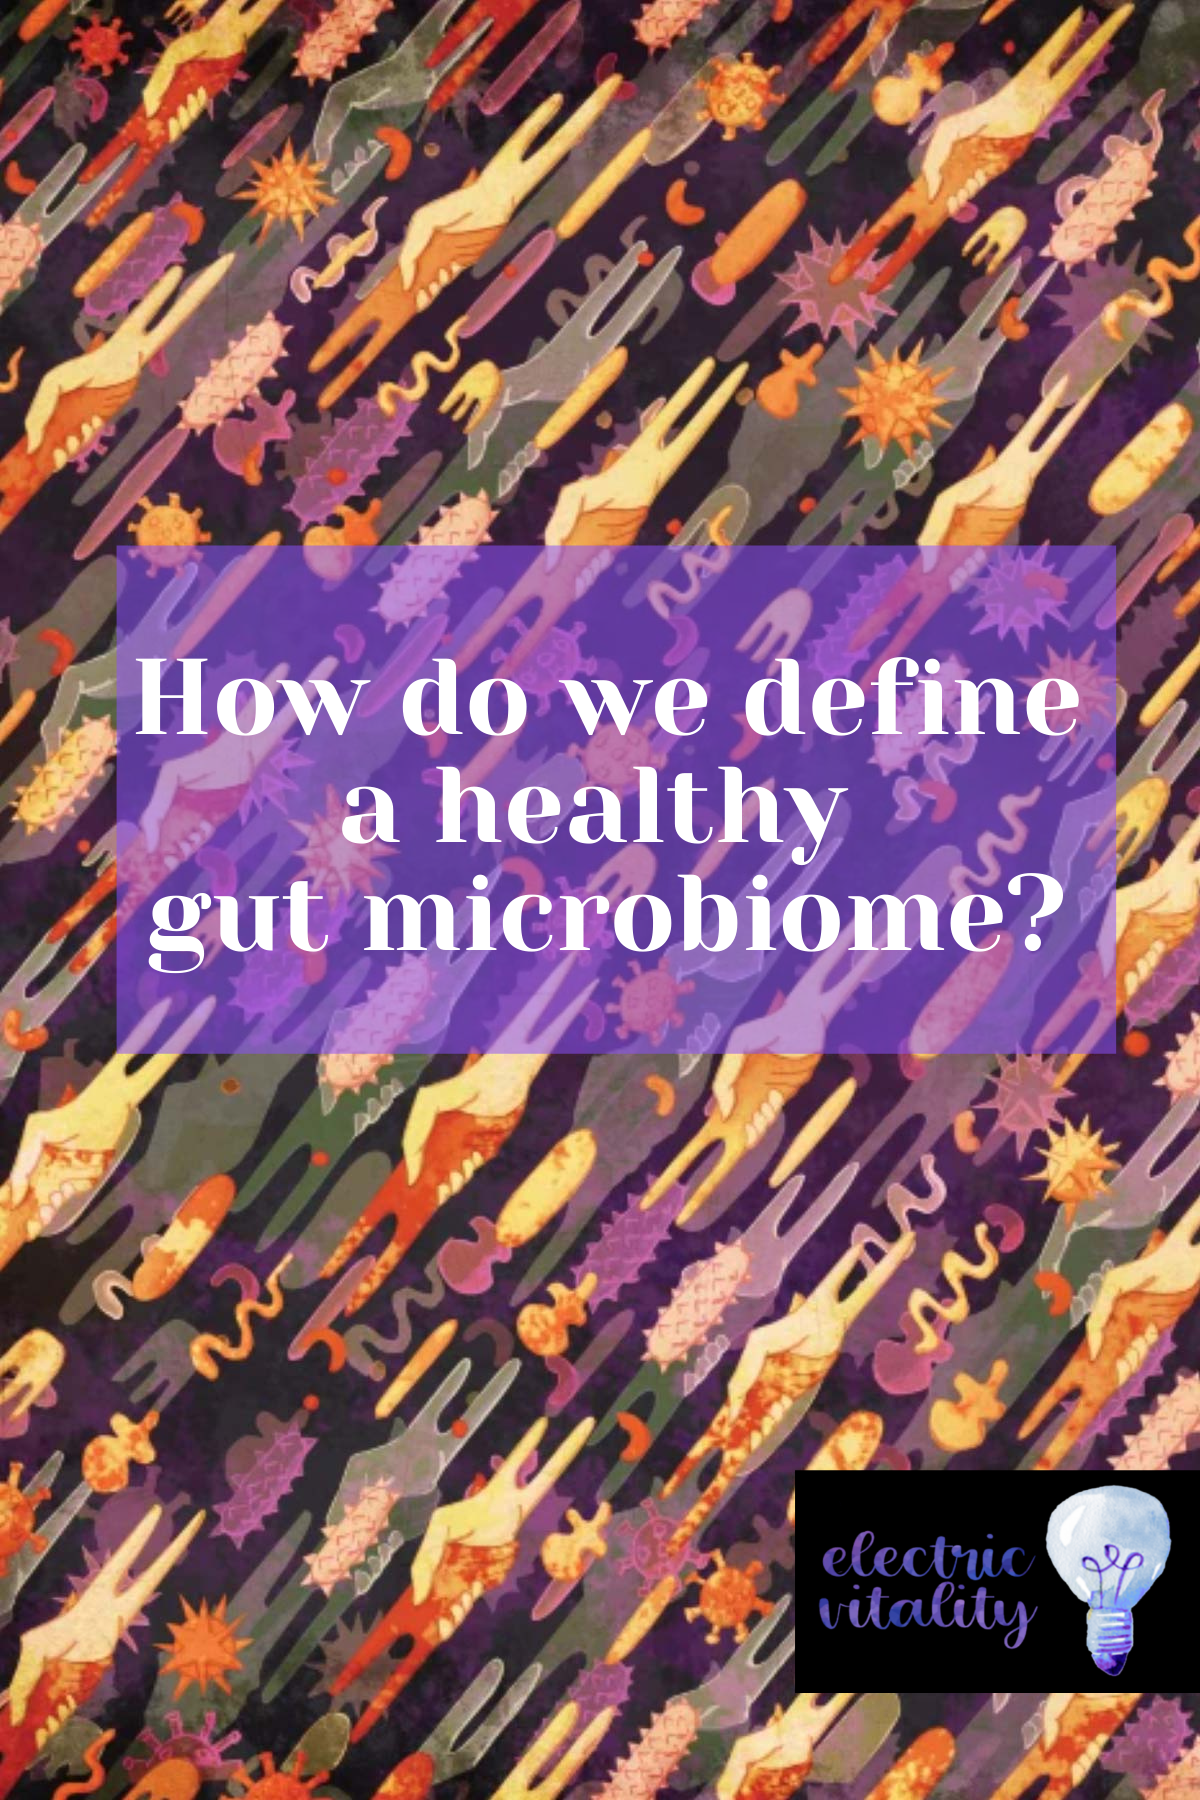 Microbiome illustration with text "How do we define a healthy gut microbiome?"